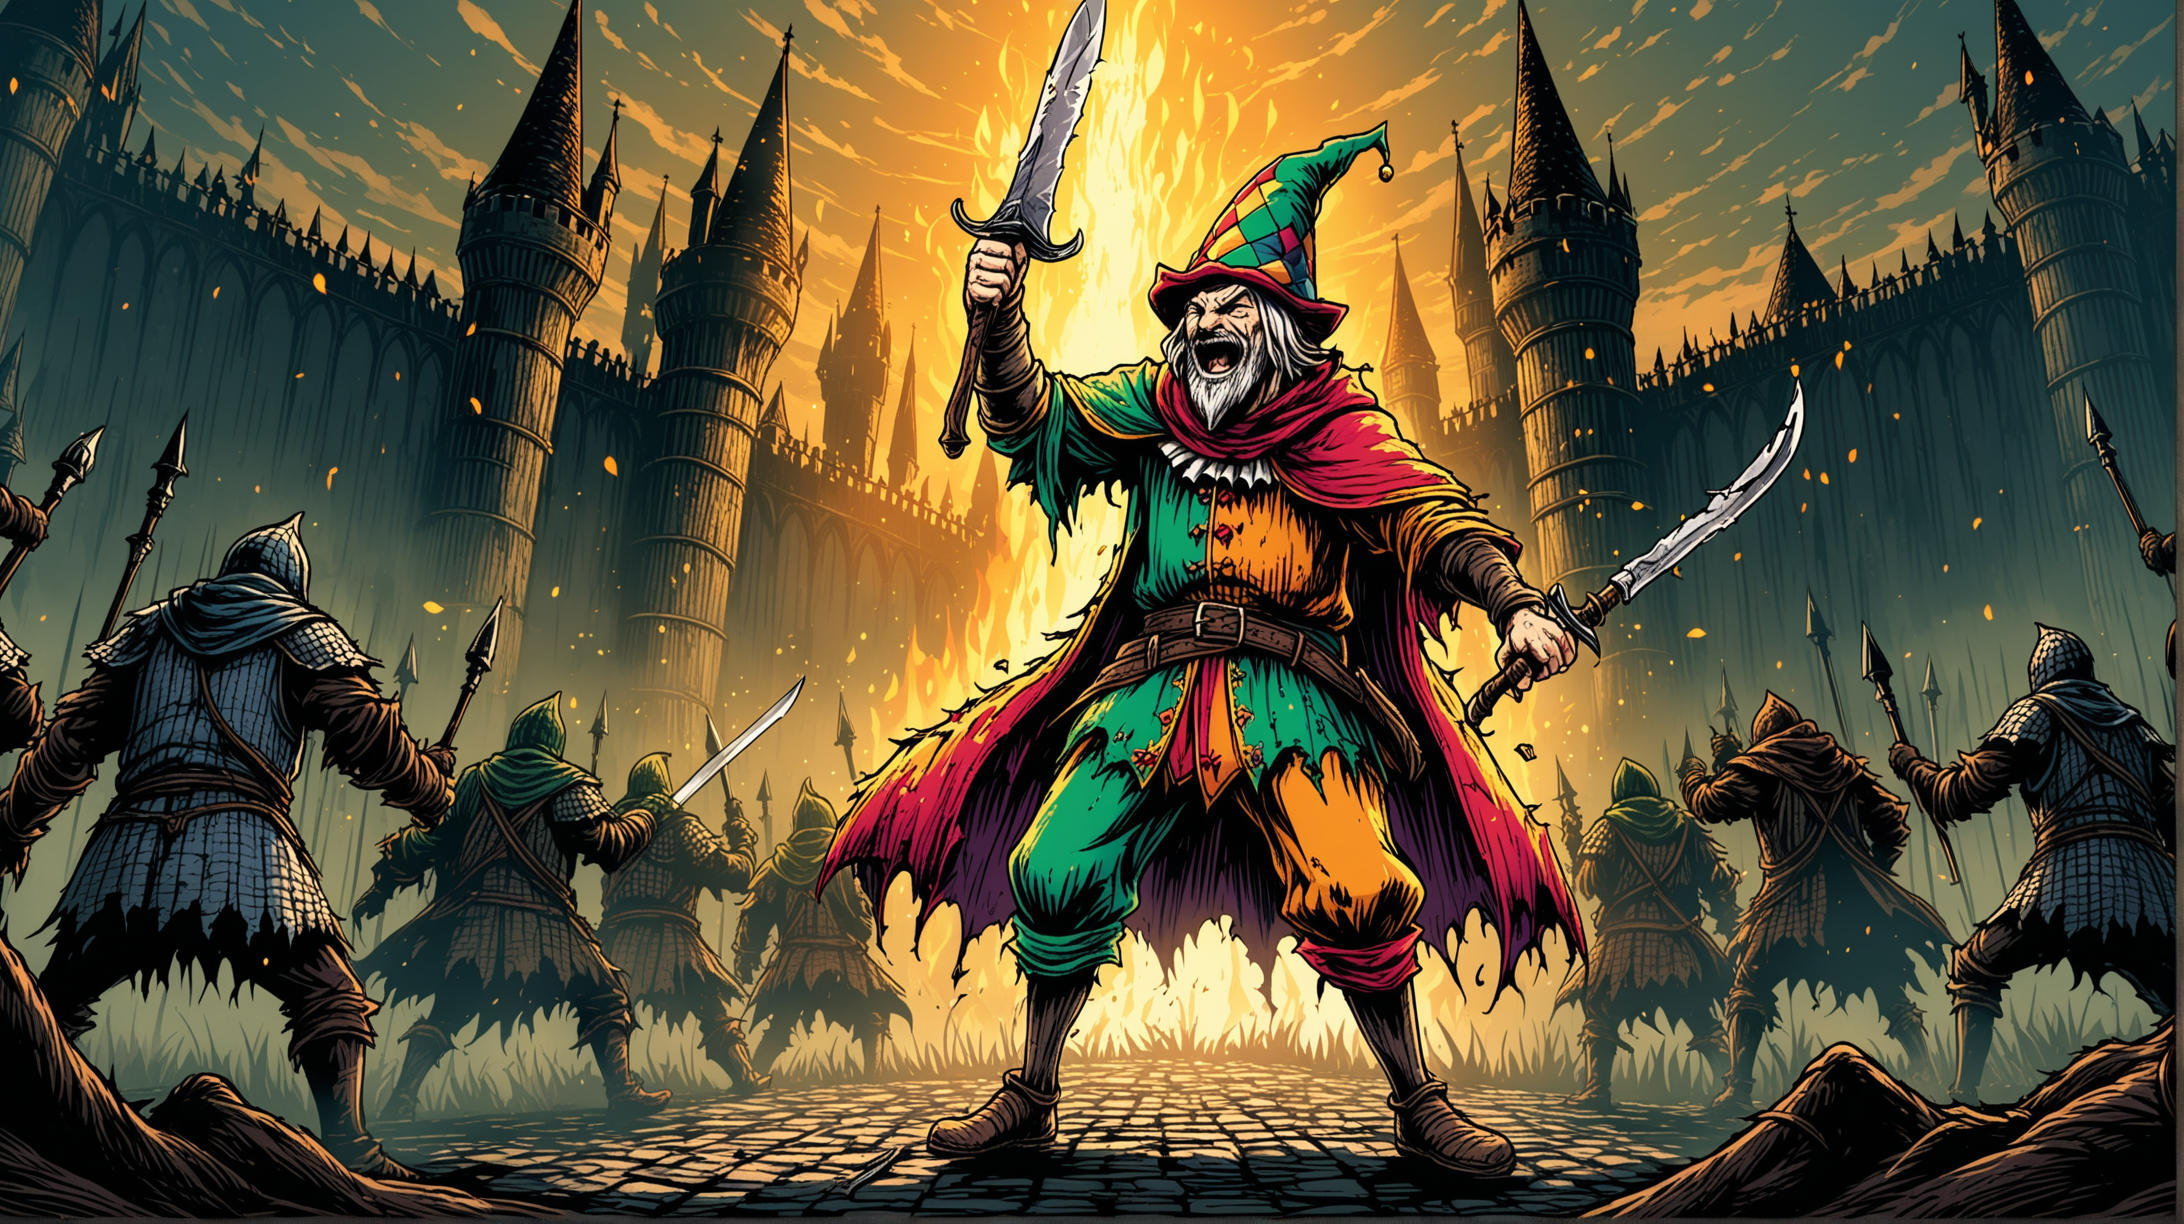 A tall, thin homeless man in a jester's hat and torn clothes with a broken knife fights the bosses of the dark souls games and wins. The style is optimistic and colorful